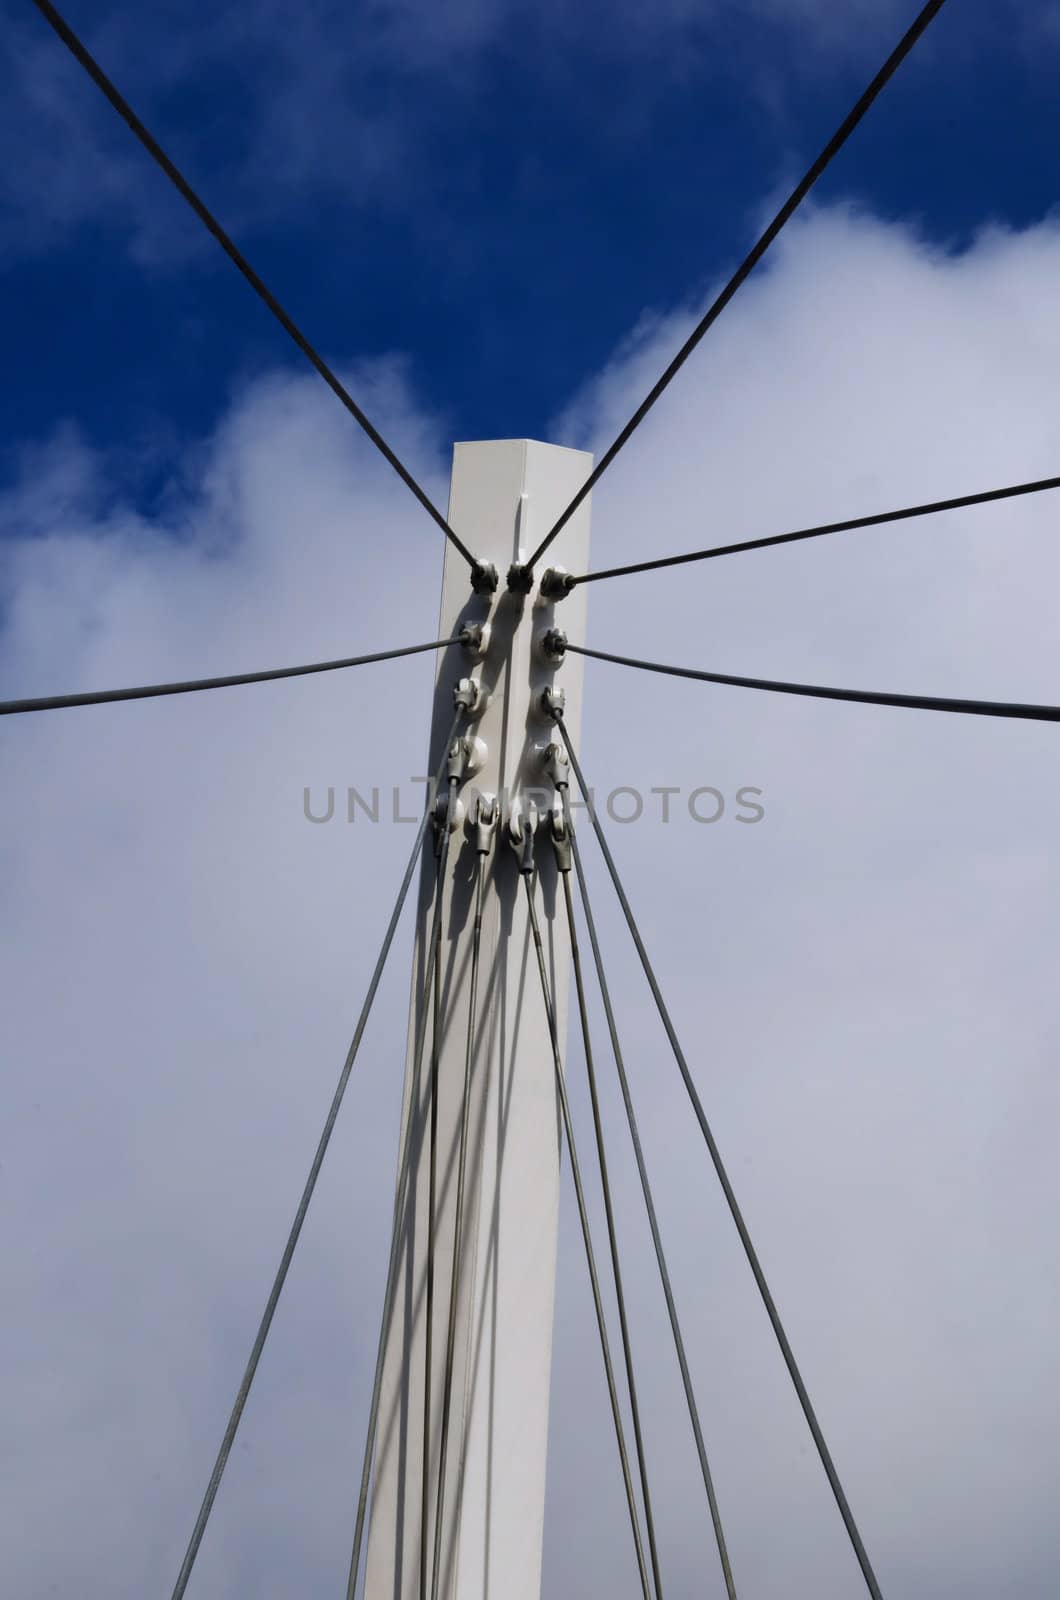 Cables supporting a suspension bridge